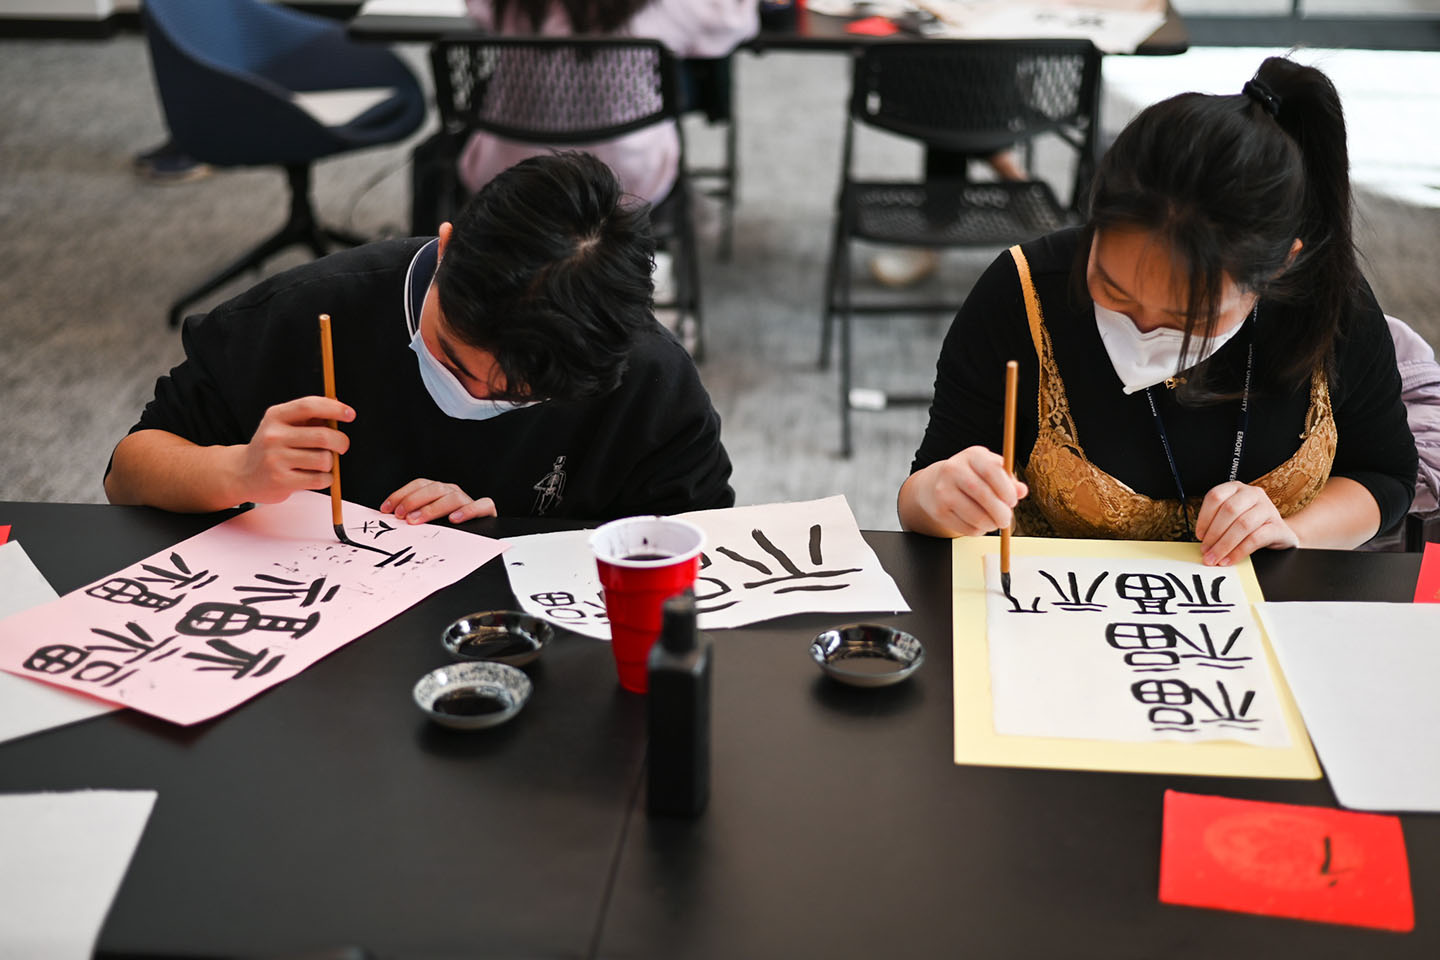 Two young people work on calligraphy